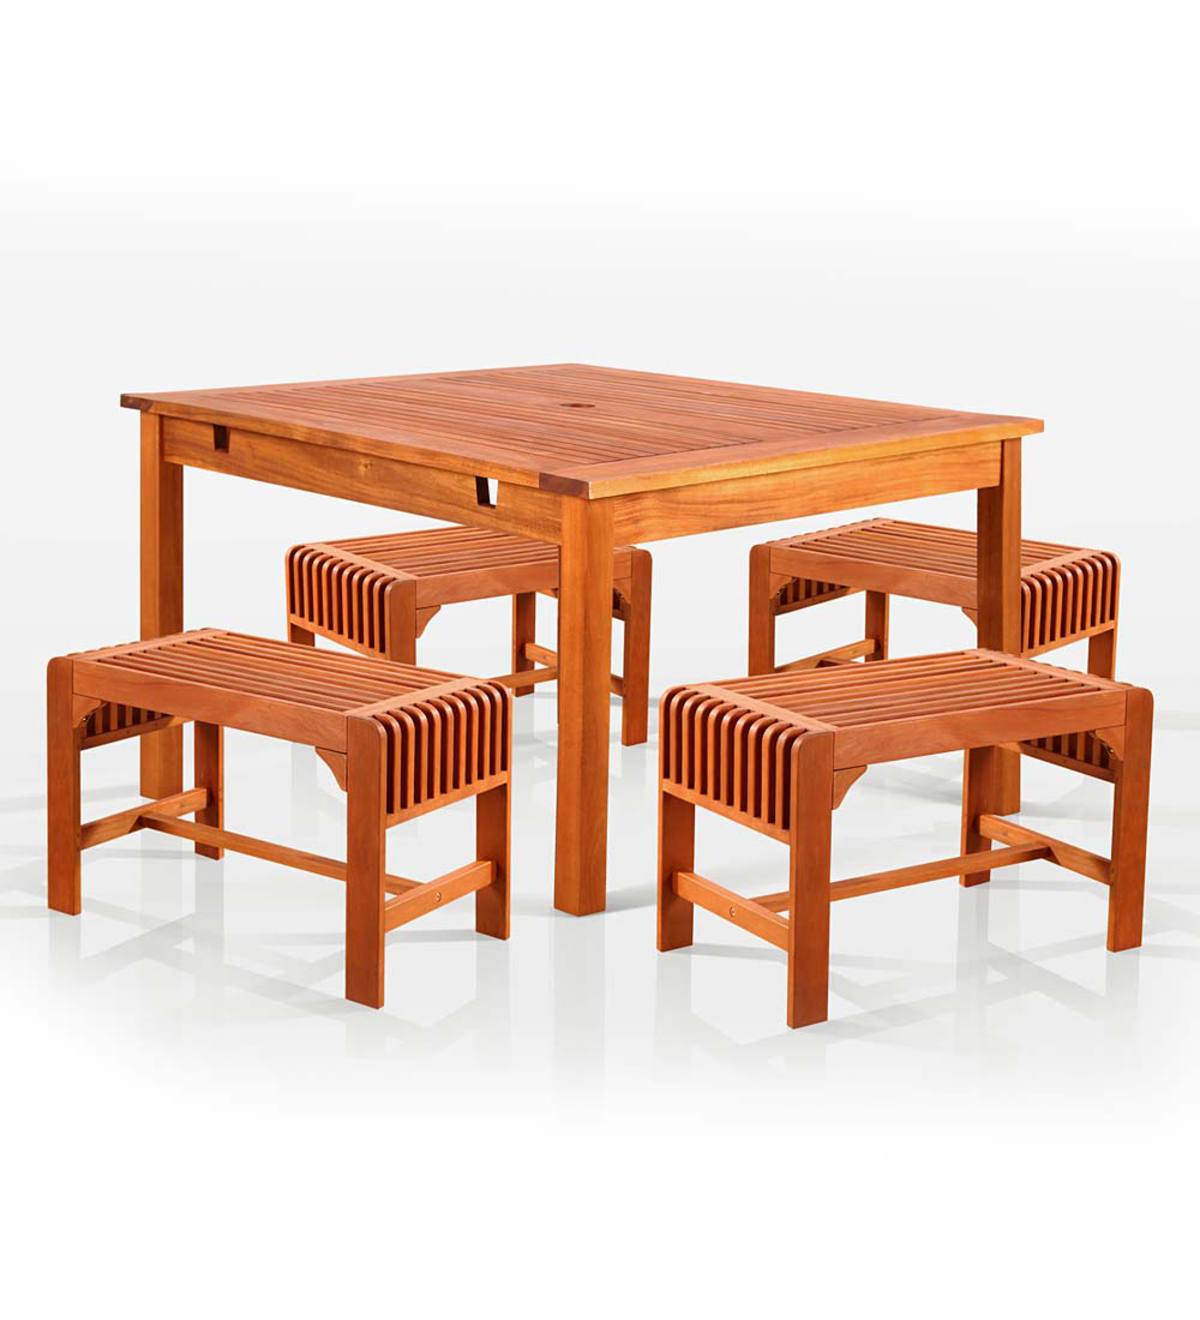 Eucalyptus Outdoor Dining Set, Table & 4 Chairs